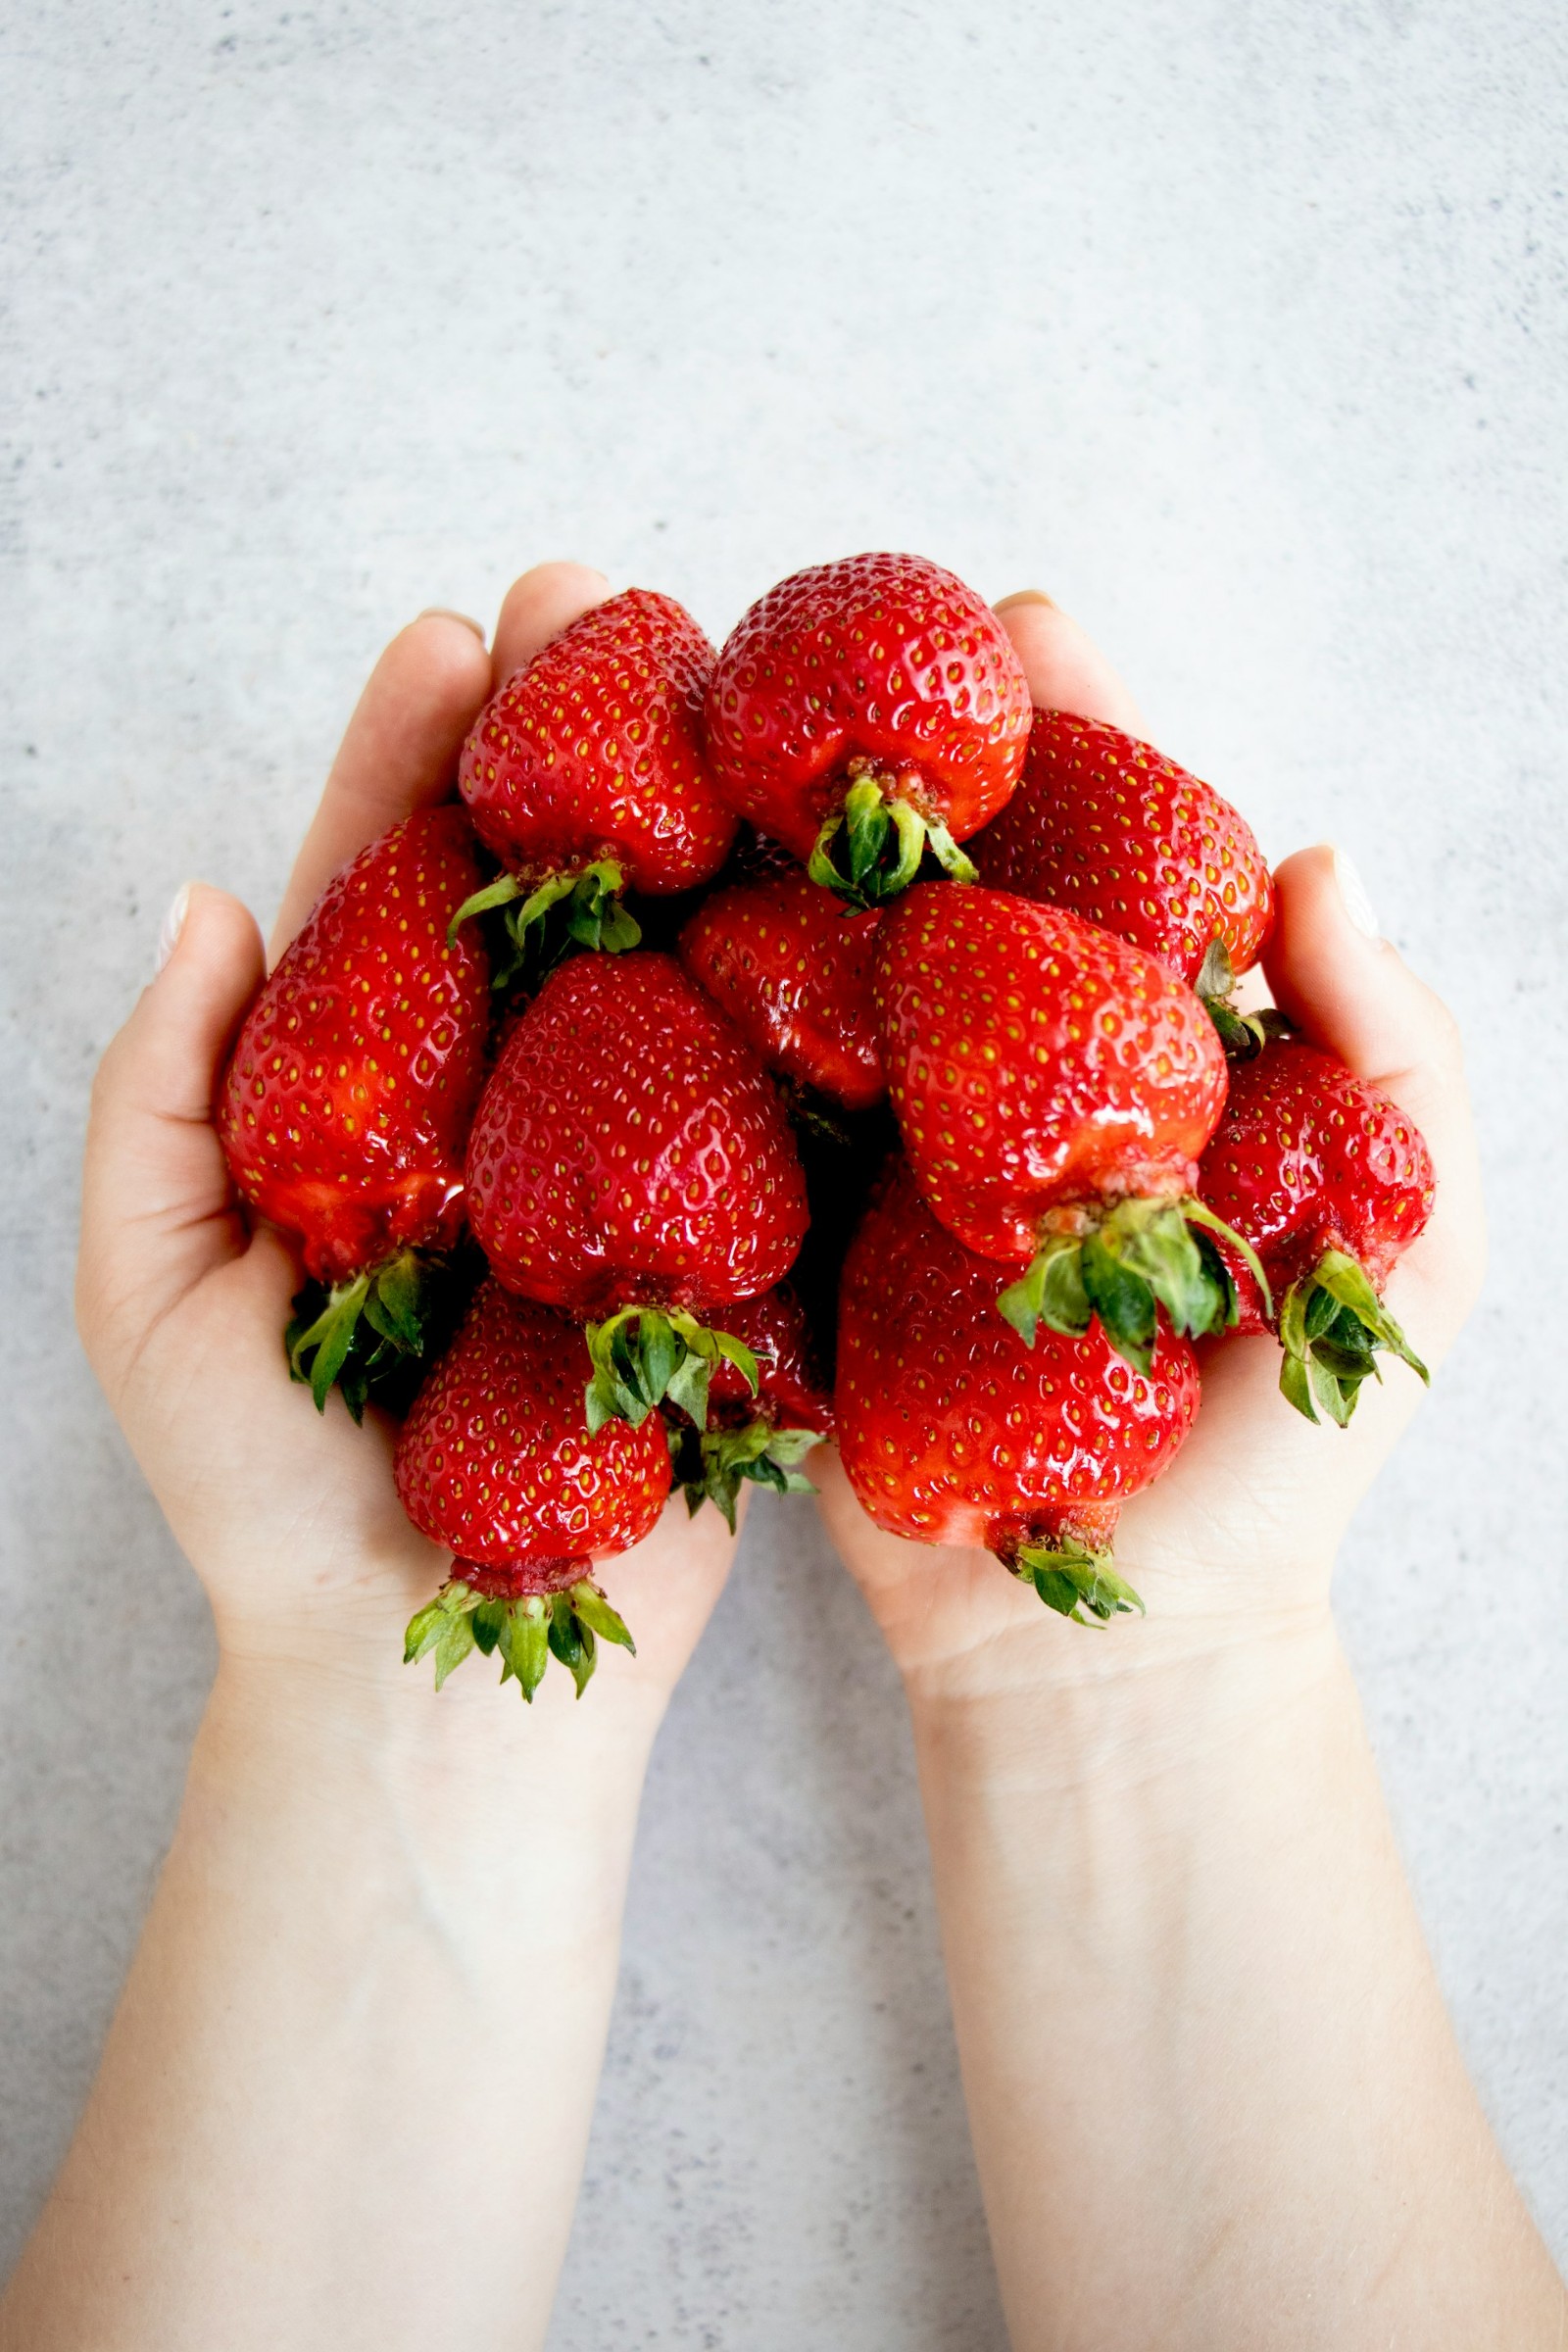 A woman's hands holding a pile of strawberries.